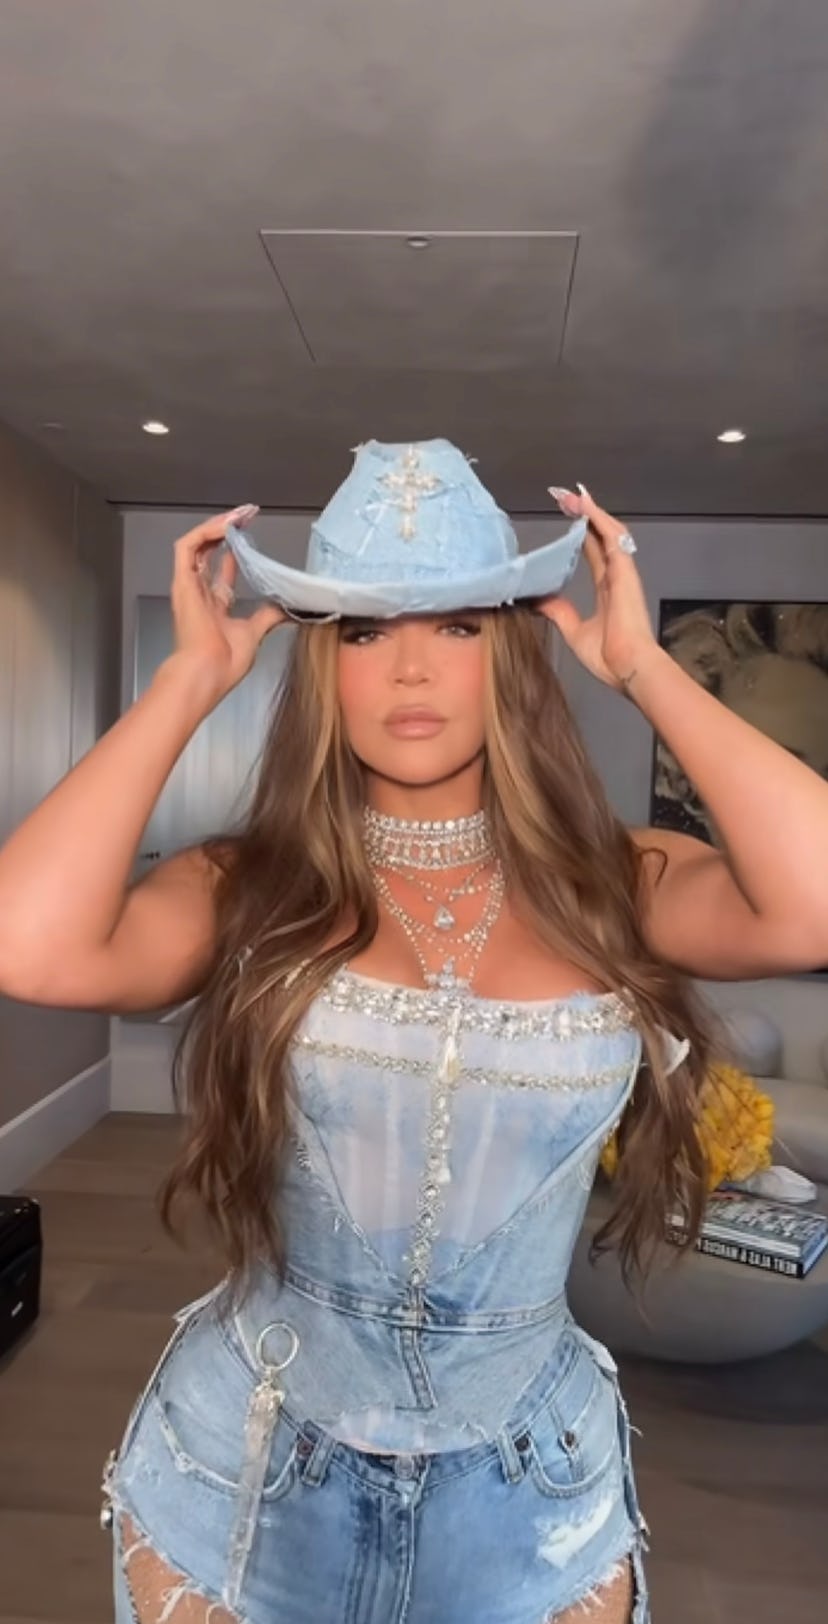 Khloé Kardashian wears a bedazzled denim corset and assless chaps on her 40th birthday. 